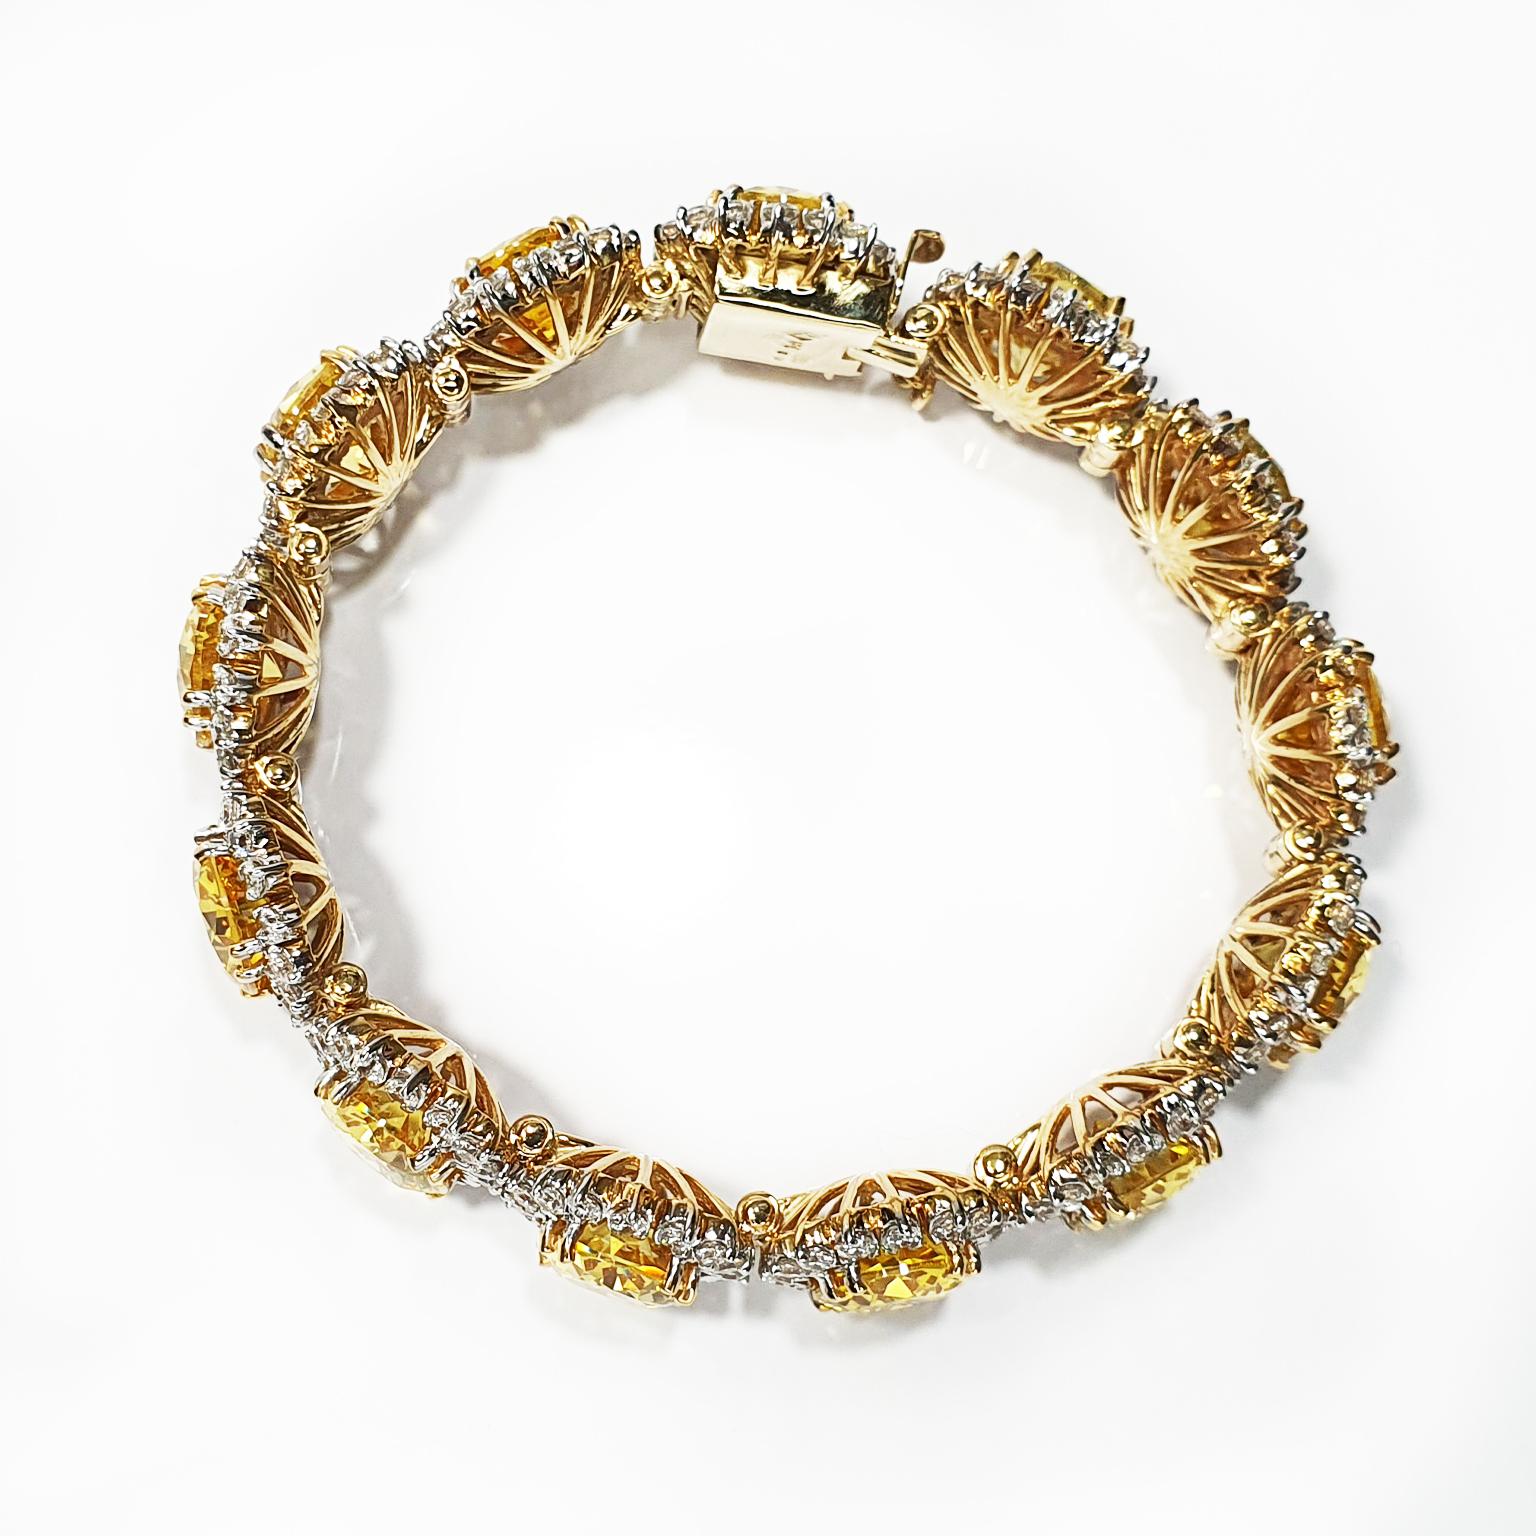 Paul Amey 9k Gold with Yellow and White Swarovski Crystal Bracelet In New Condition For Sale In Tewantin, Queensland